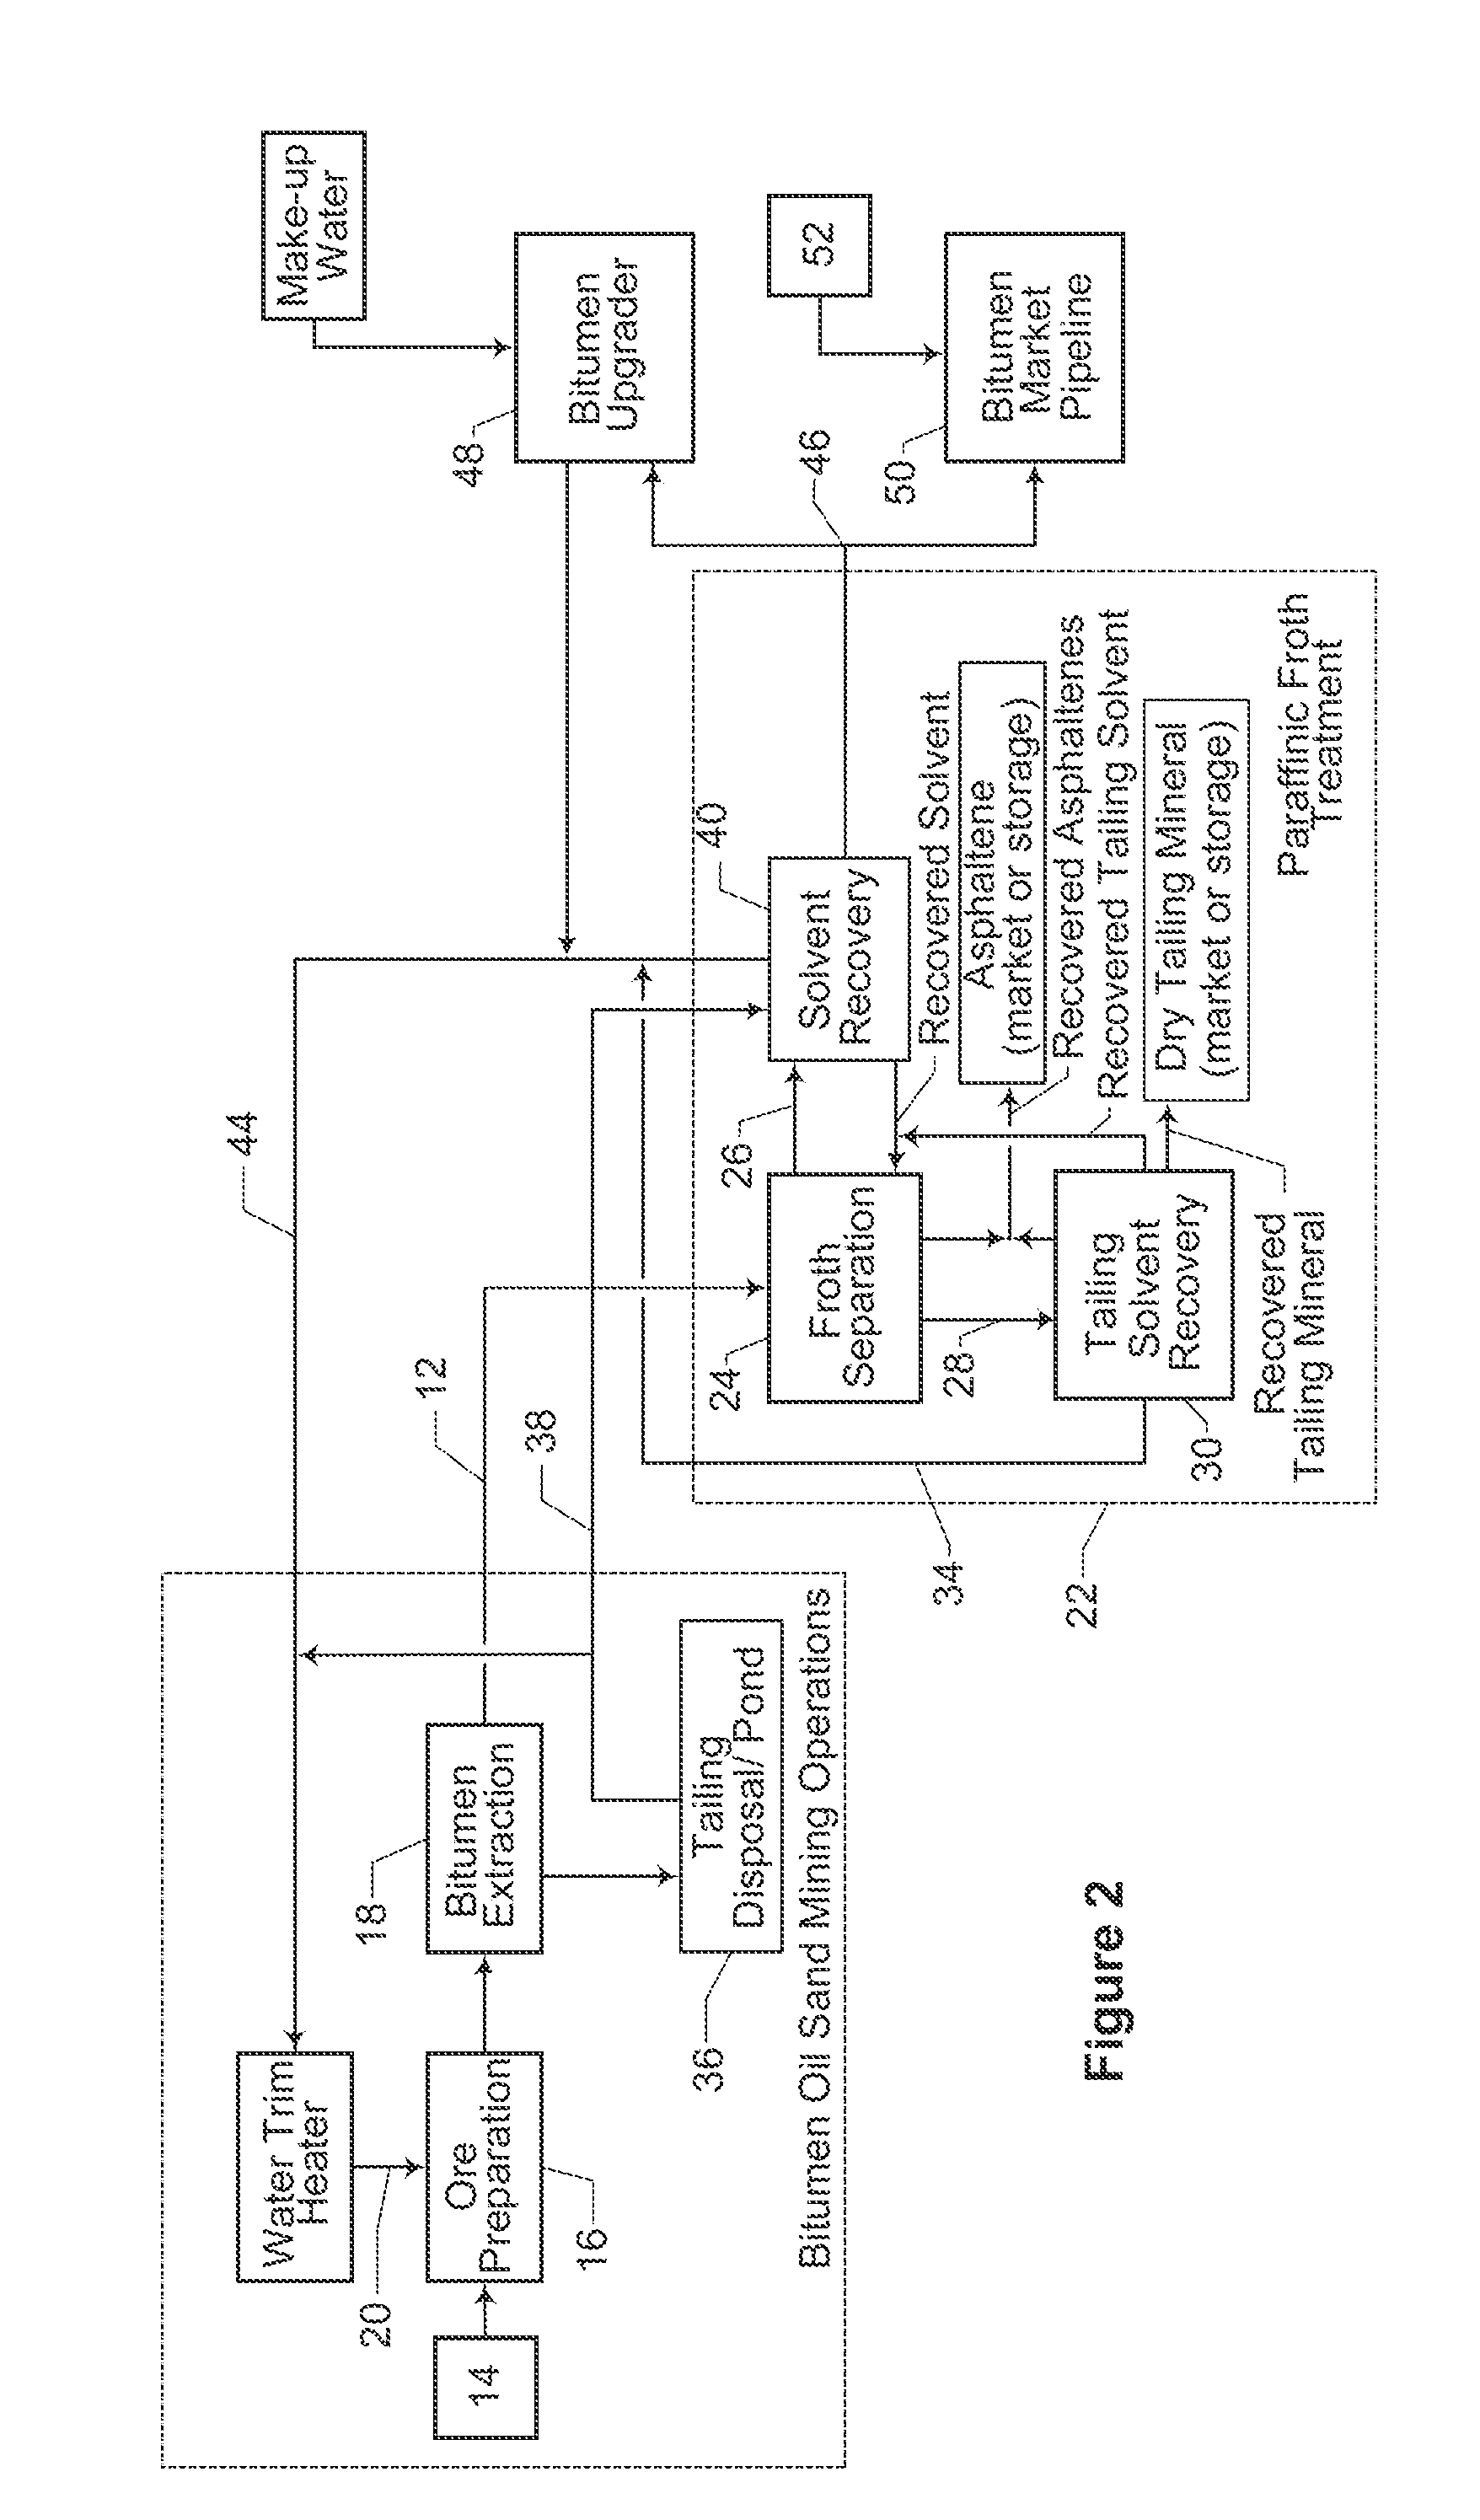 Process For Integration of Paraffinic Froth Treatment Hub and A Bitumen Ore Mining and Extraction Facility